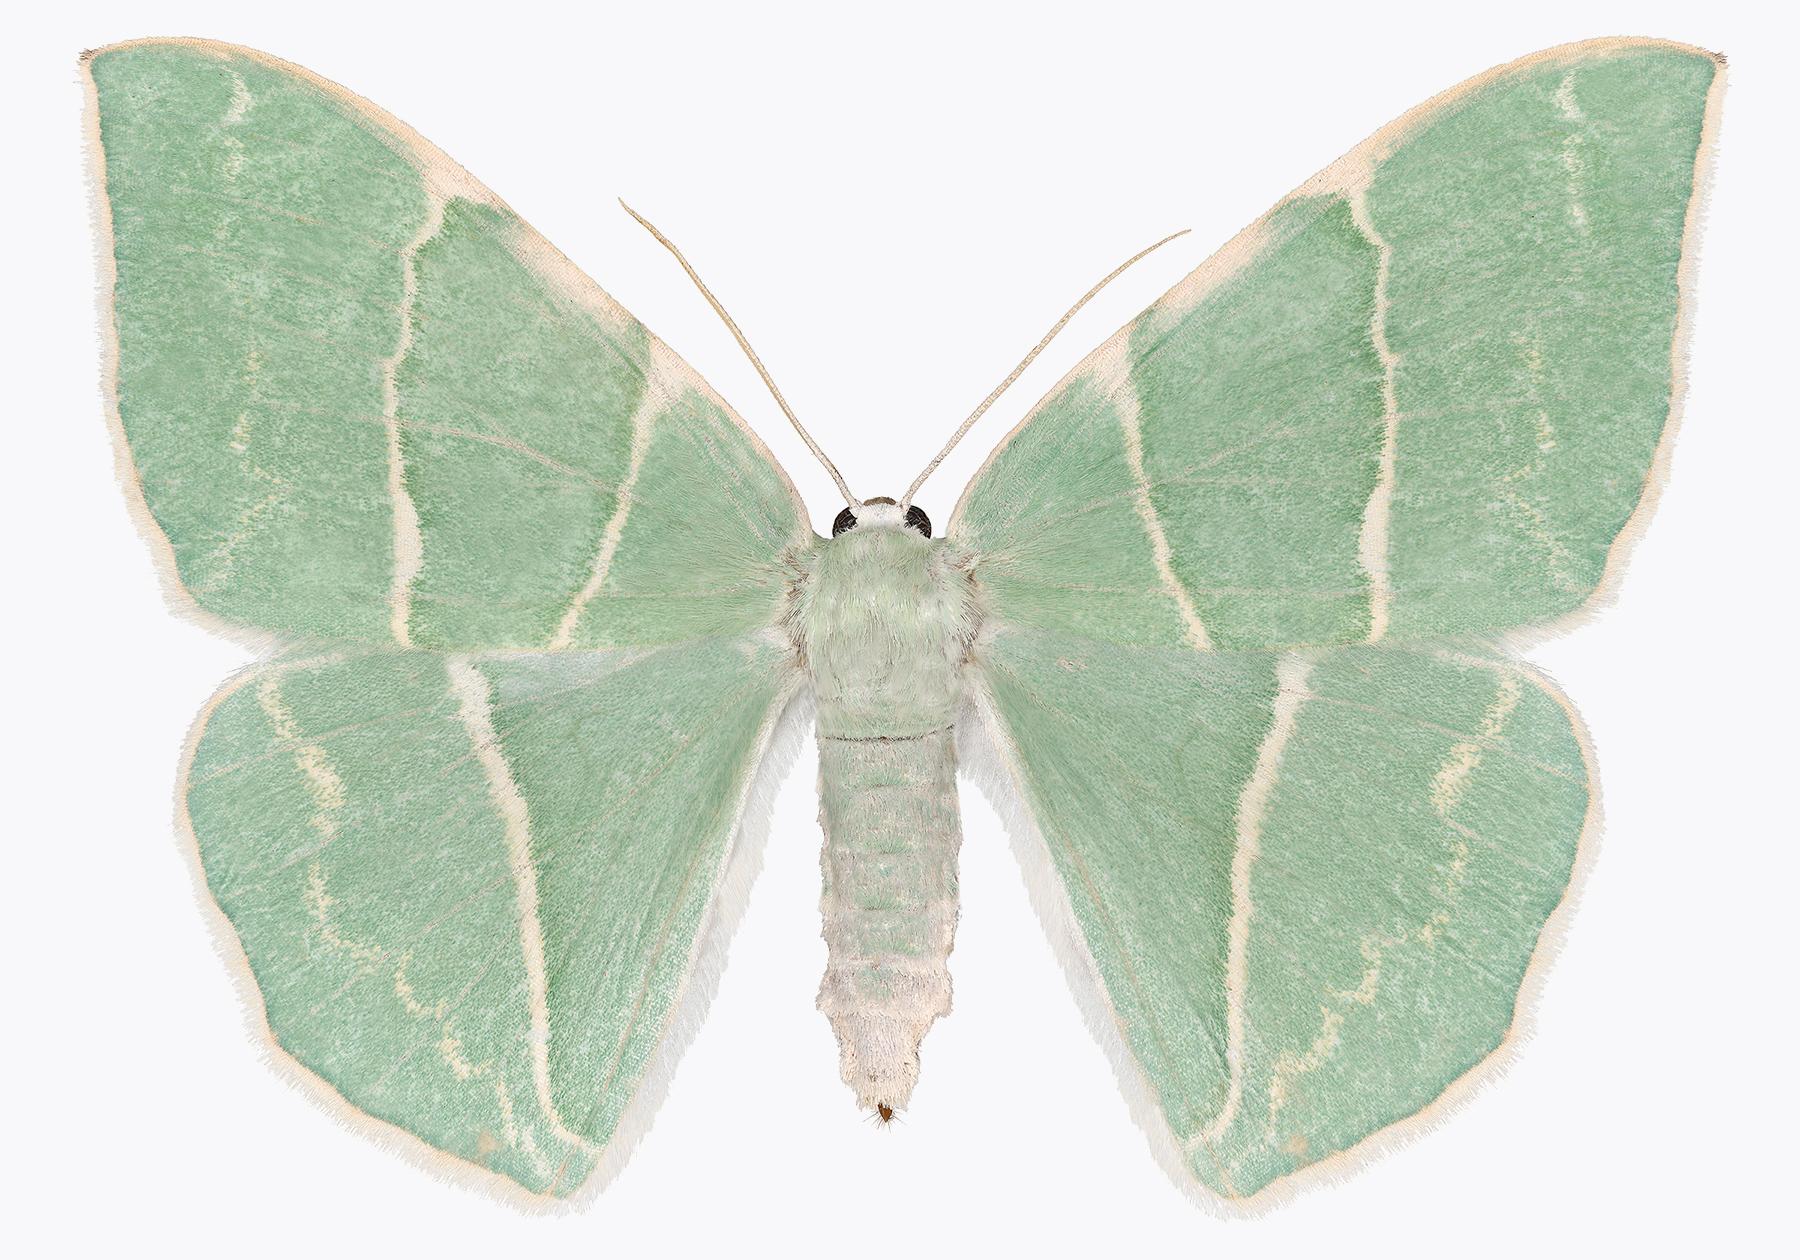 Joseph Scheer Color Photograph - Geometra Glaucaria, Insect Nature Photograph, Light Green, Ivory Moth on White